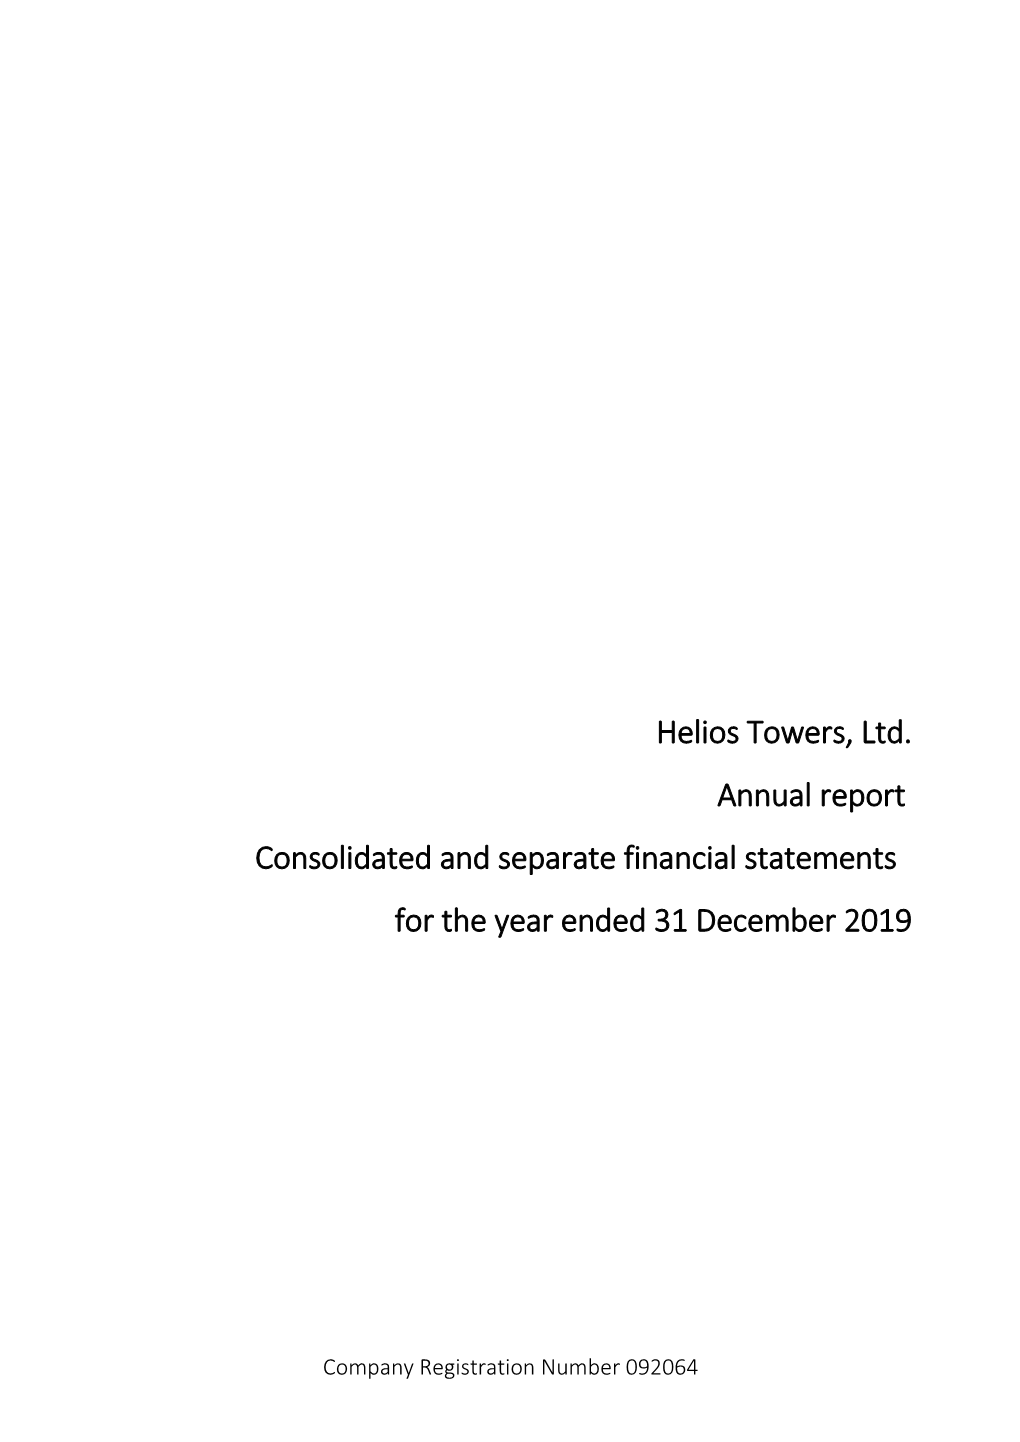 Helios Towers, Ltd. Annual Report Consolidated and Separate Financial Statements for the Year Ended 31 December 2019